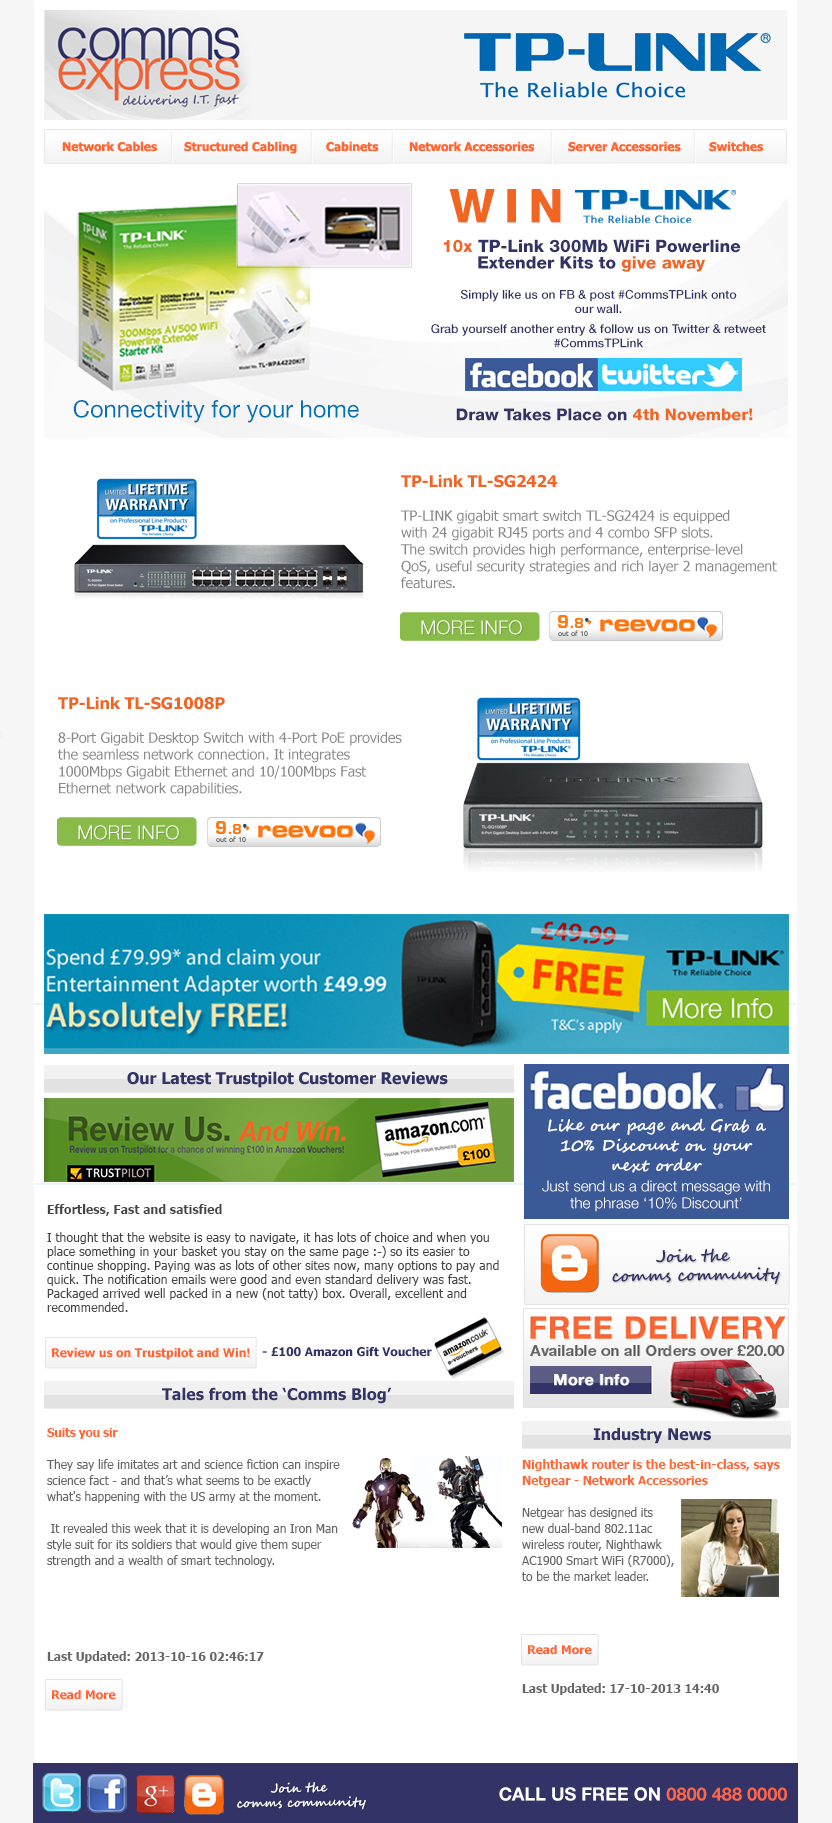 Great Offers on TP-Link Products with Comms Express